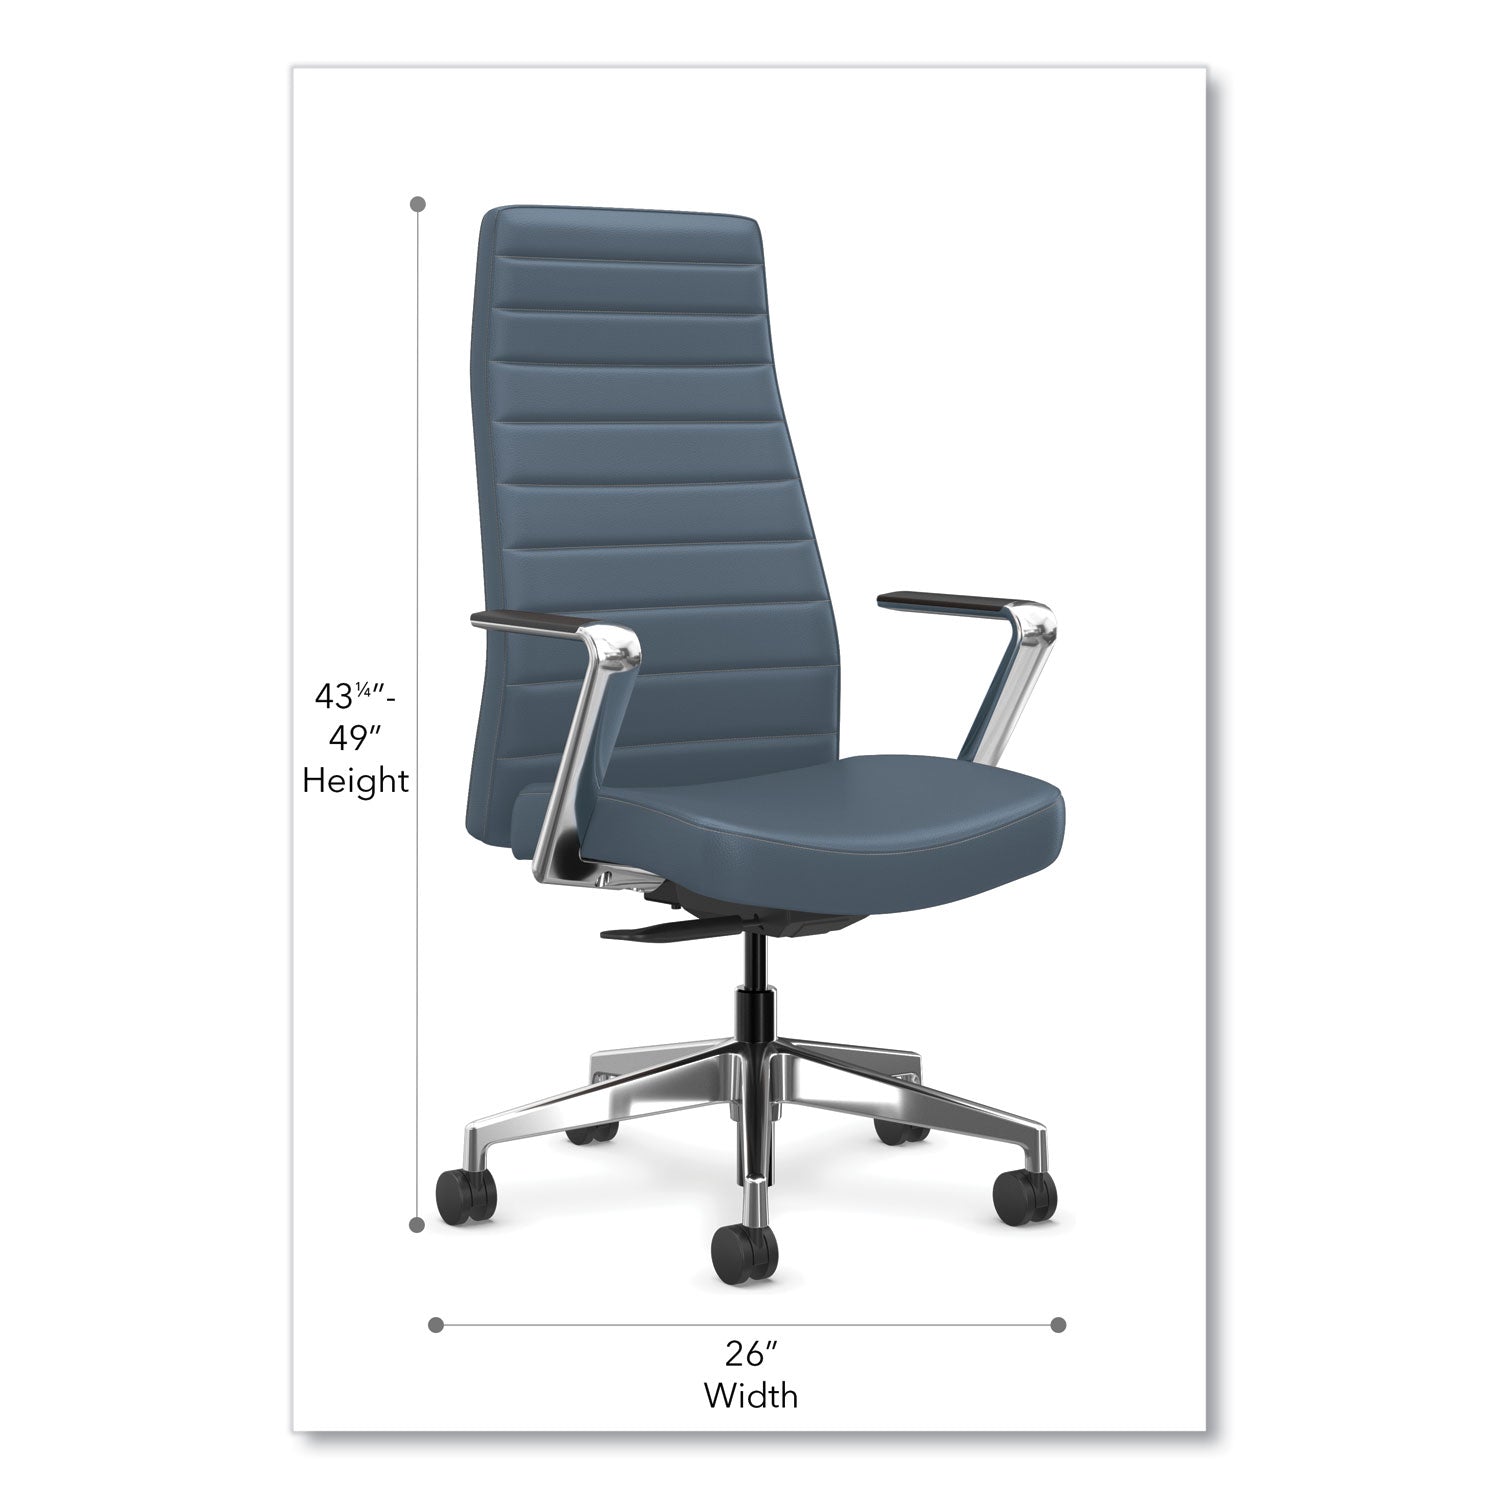 cofi-executive-high-back-chair-supports-up-to-300-lb-nimbus-seat-back-polished-aluminum-base-ships-in-7-10-business-days_honceuw0pu93c9p - 3